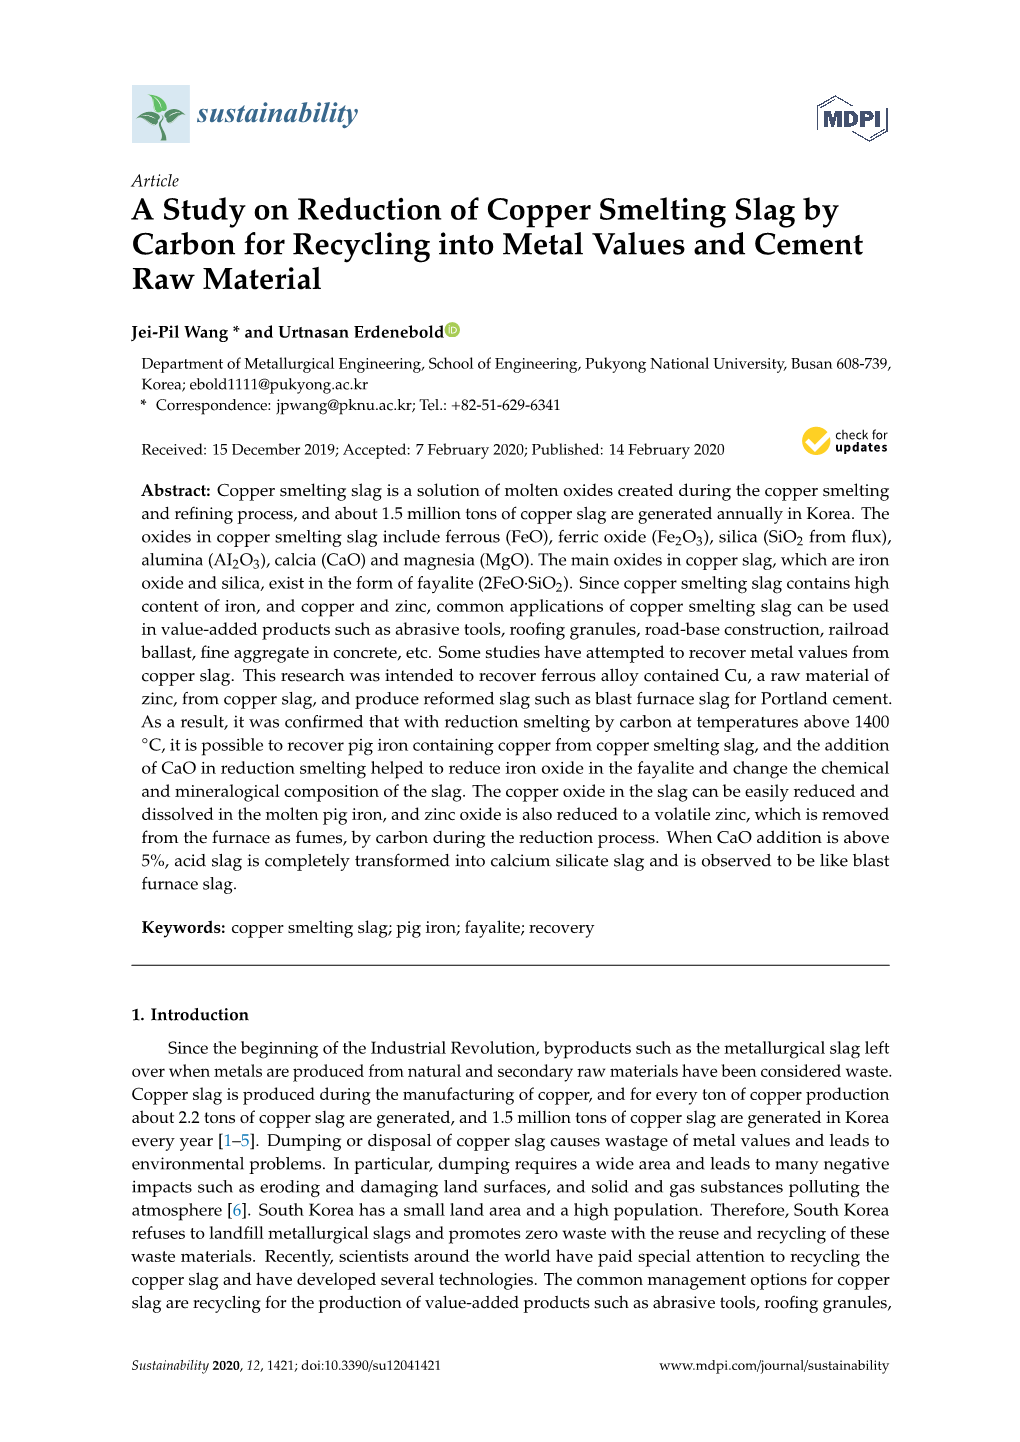 A Study on Reduction of Copper Smelting Slag by Carbon for Recycling Into Metal Values and Cement Raw Material